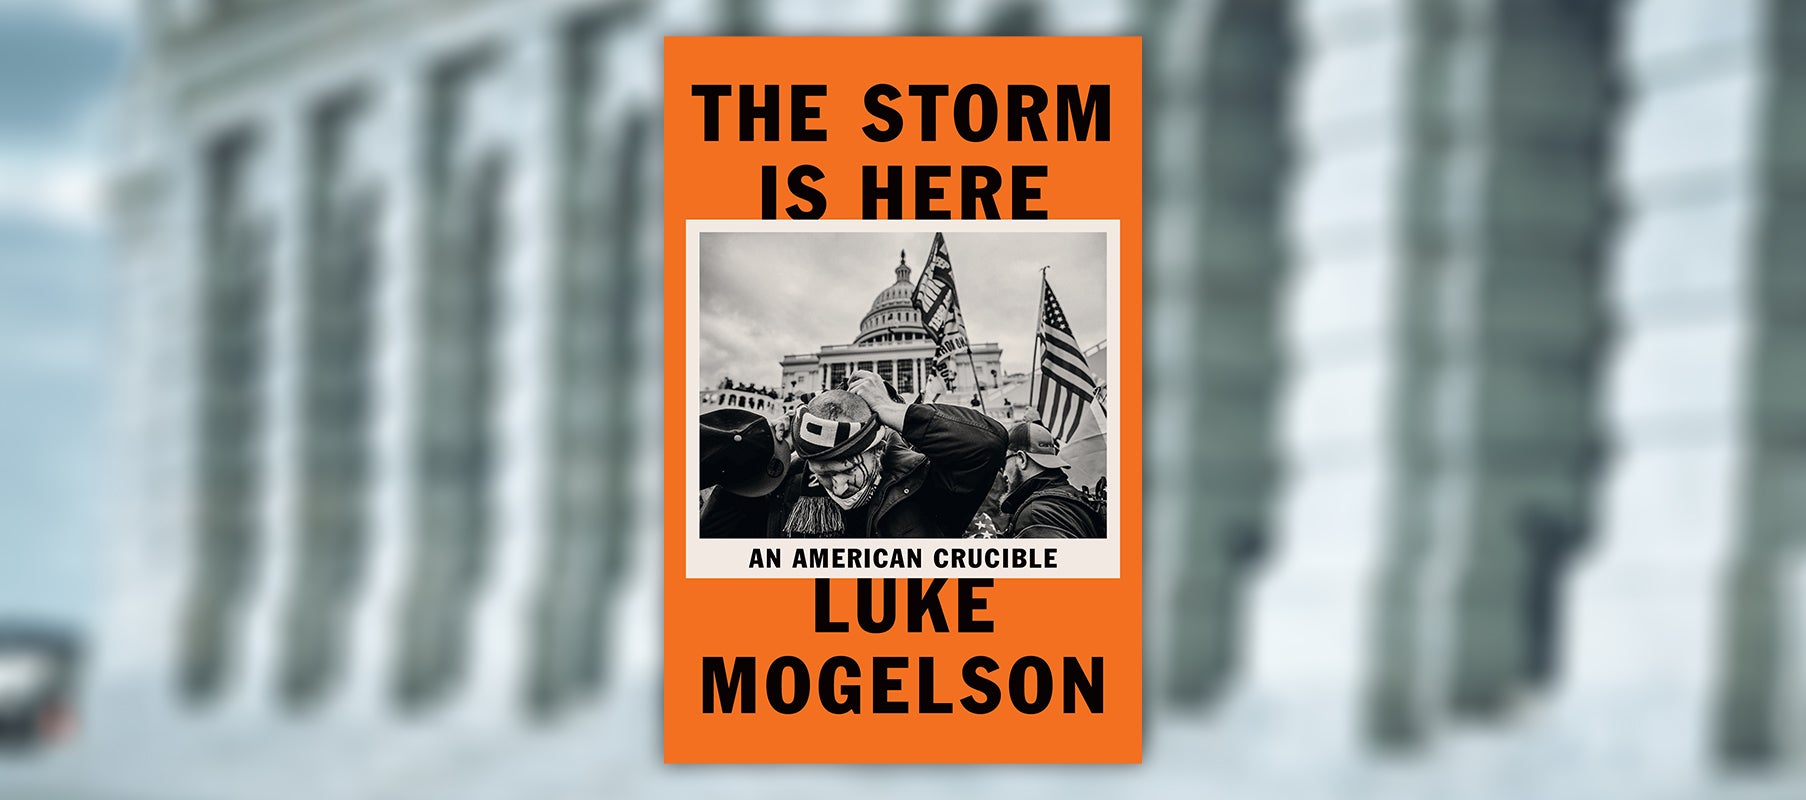 FROM THE PAGE: An Excerpt from Luke Mogelson’s <I>The Storm Is Here</I>